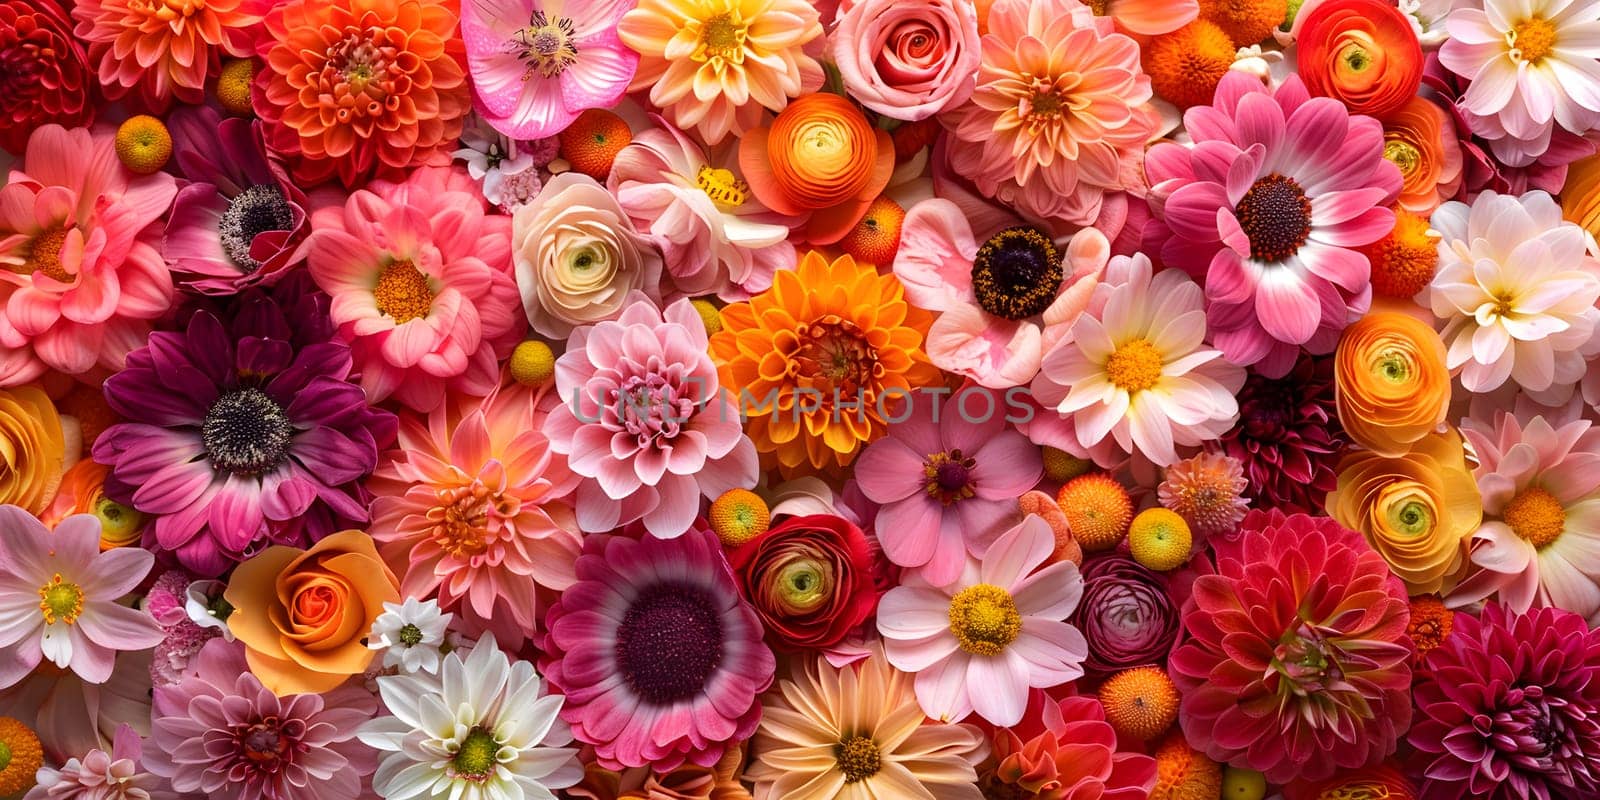 The picture displays a variety of flowers, showcasing the beauty of different types such as magenta petals, artificial flowers, and bouquets arranged as a stunning art piece